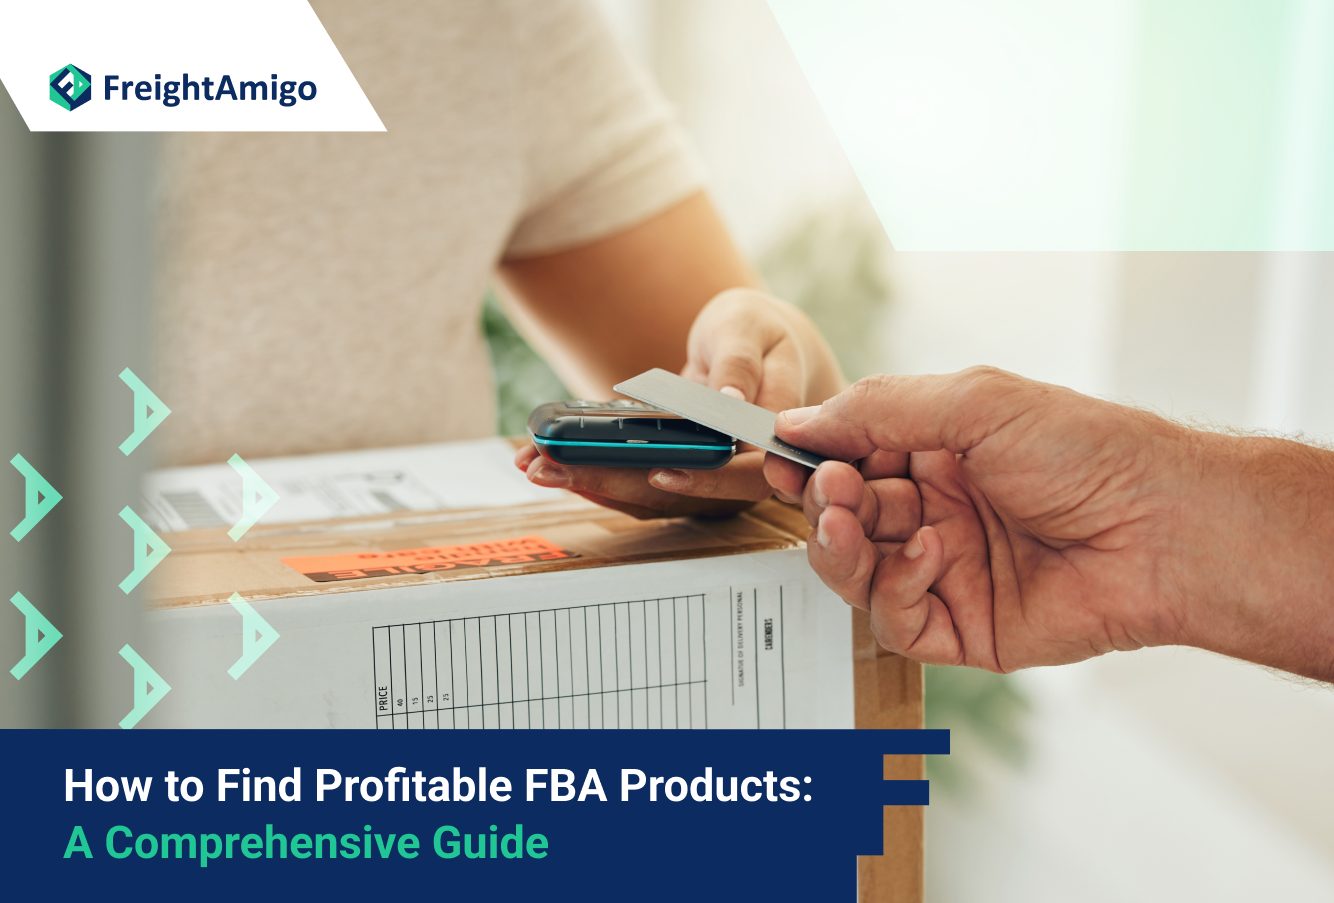 How to Find Profitable FBA Products 2023: A Comprehensive Guide